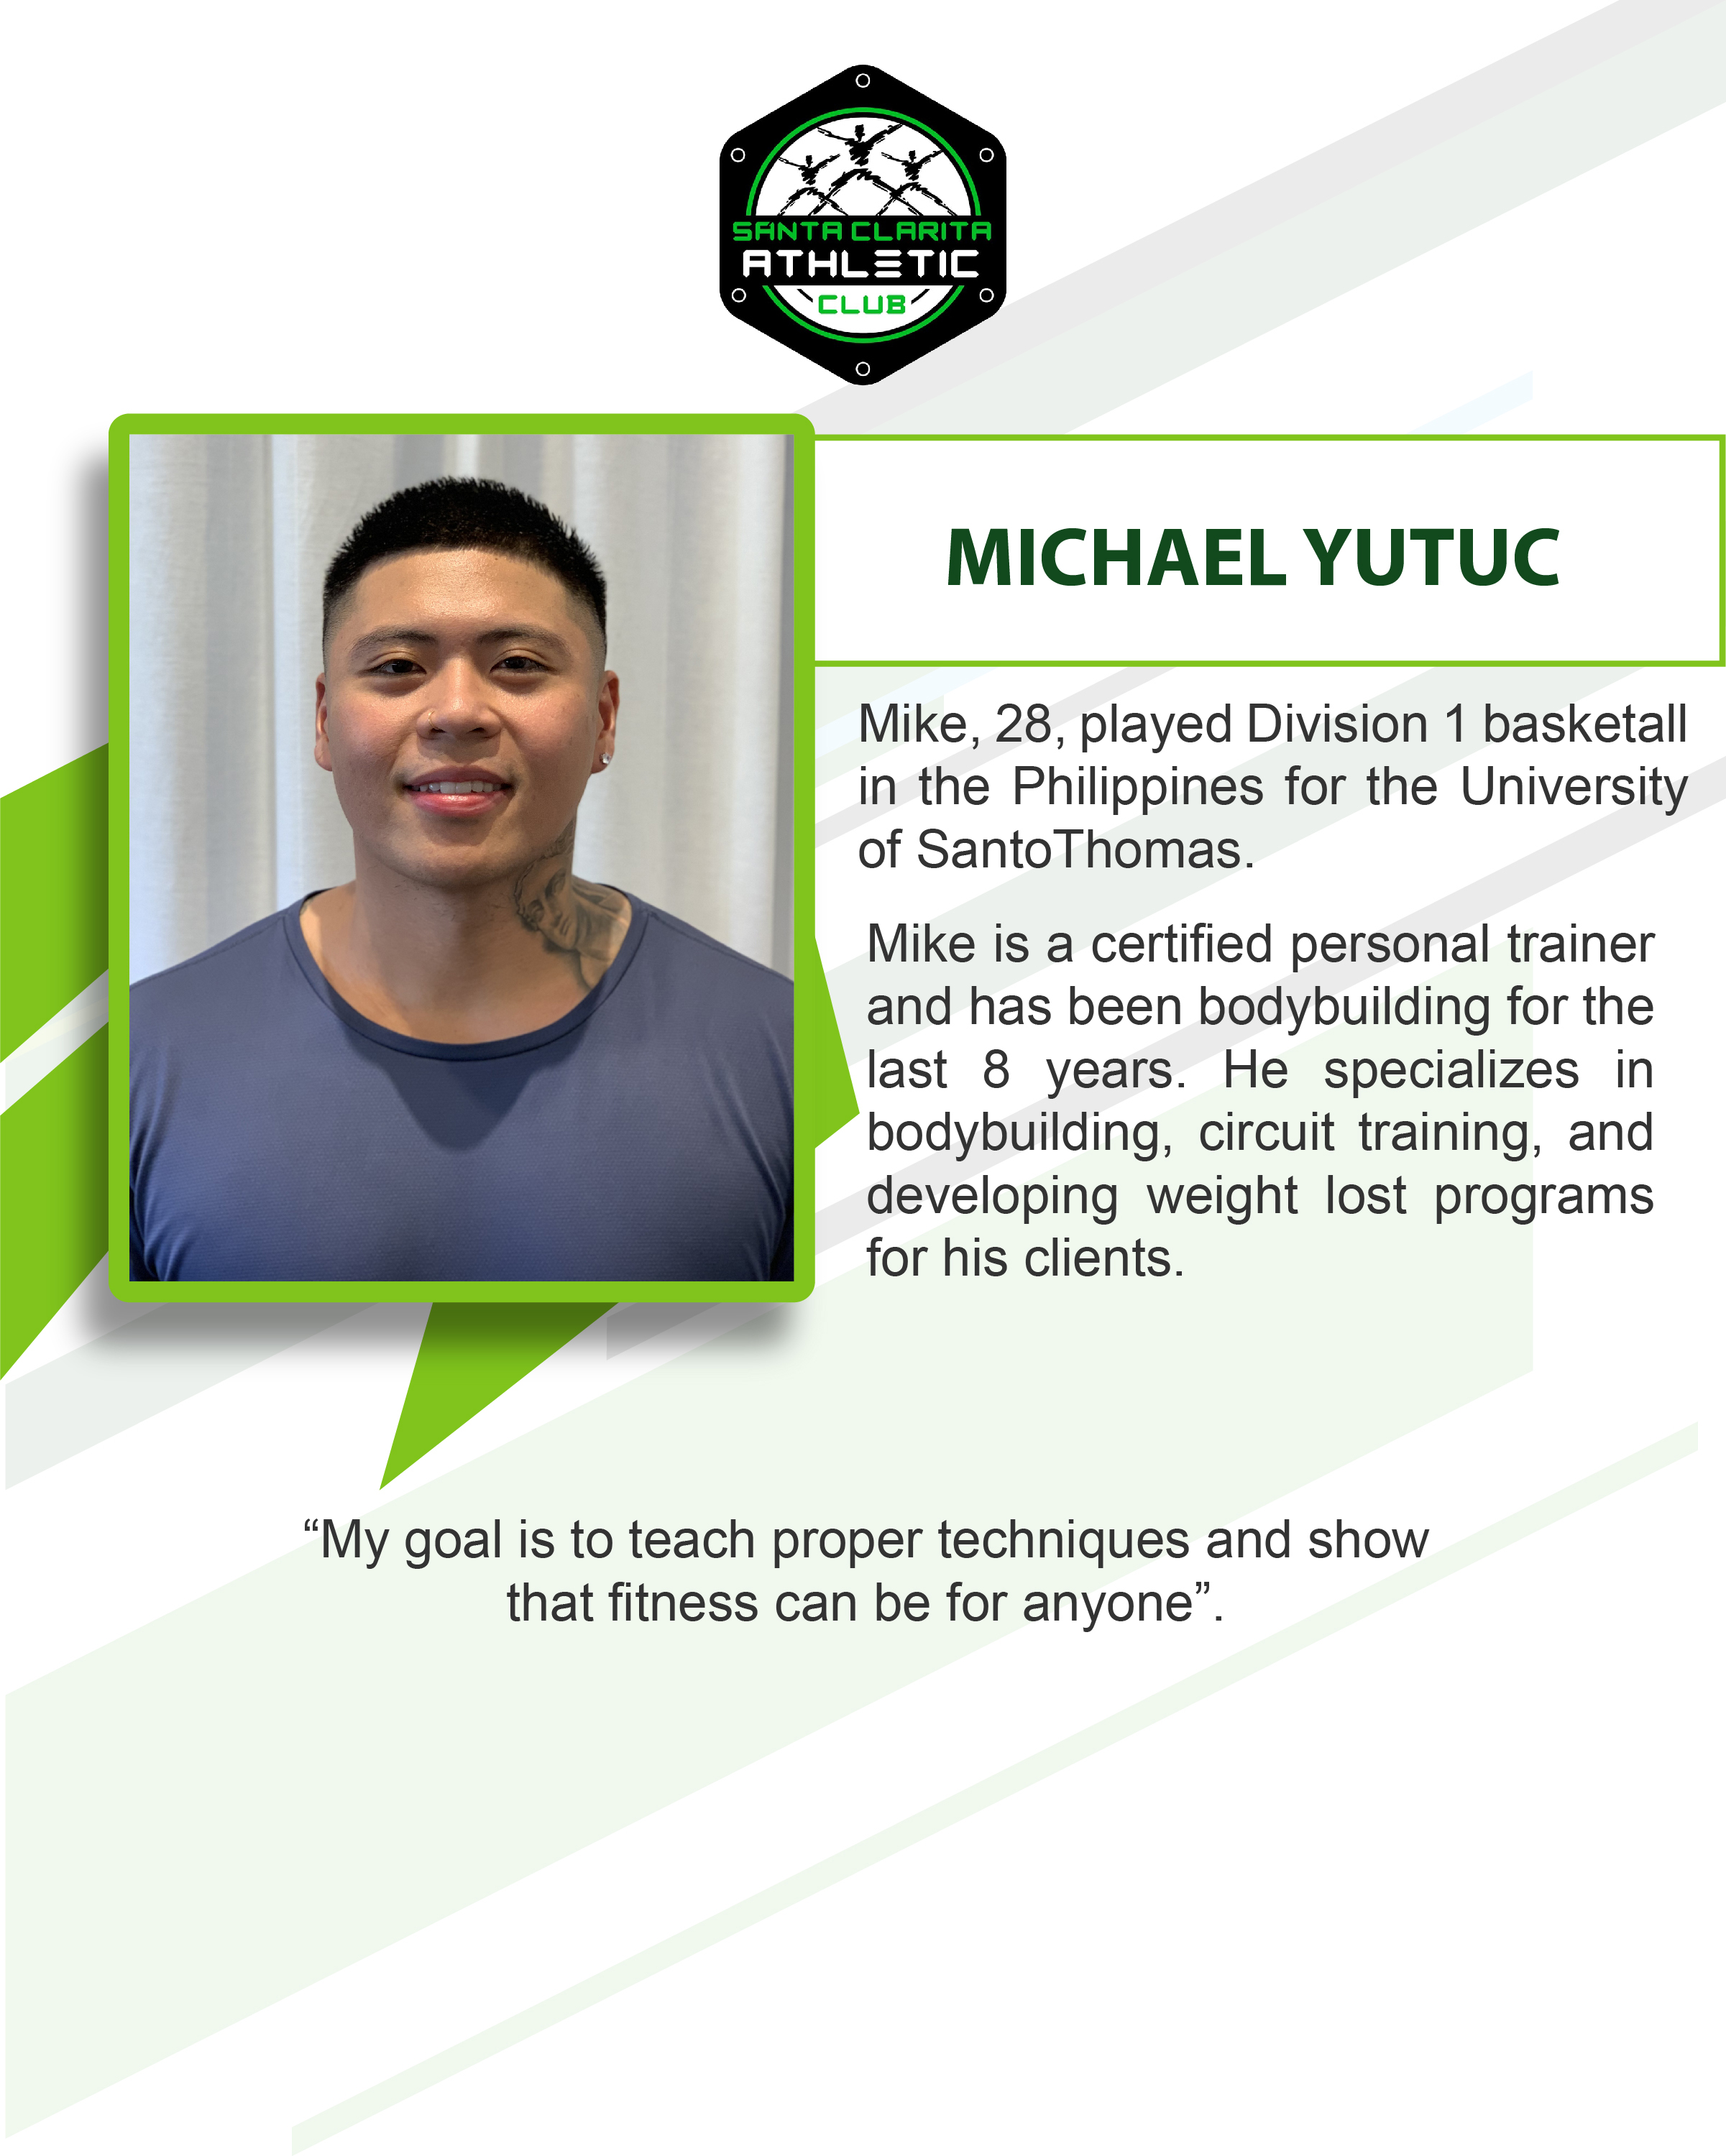 Michael Yutuc - Certified Personal Trainer